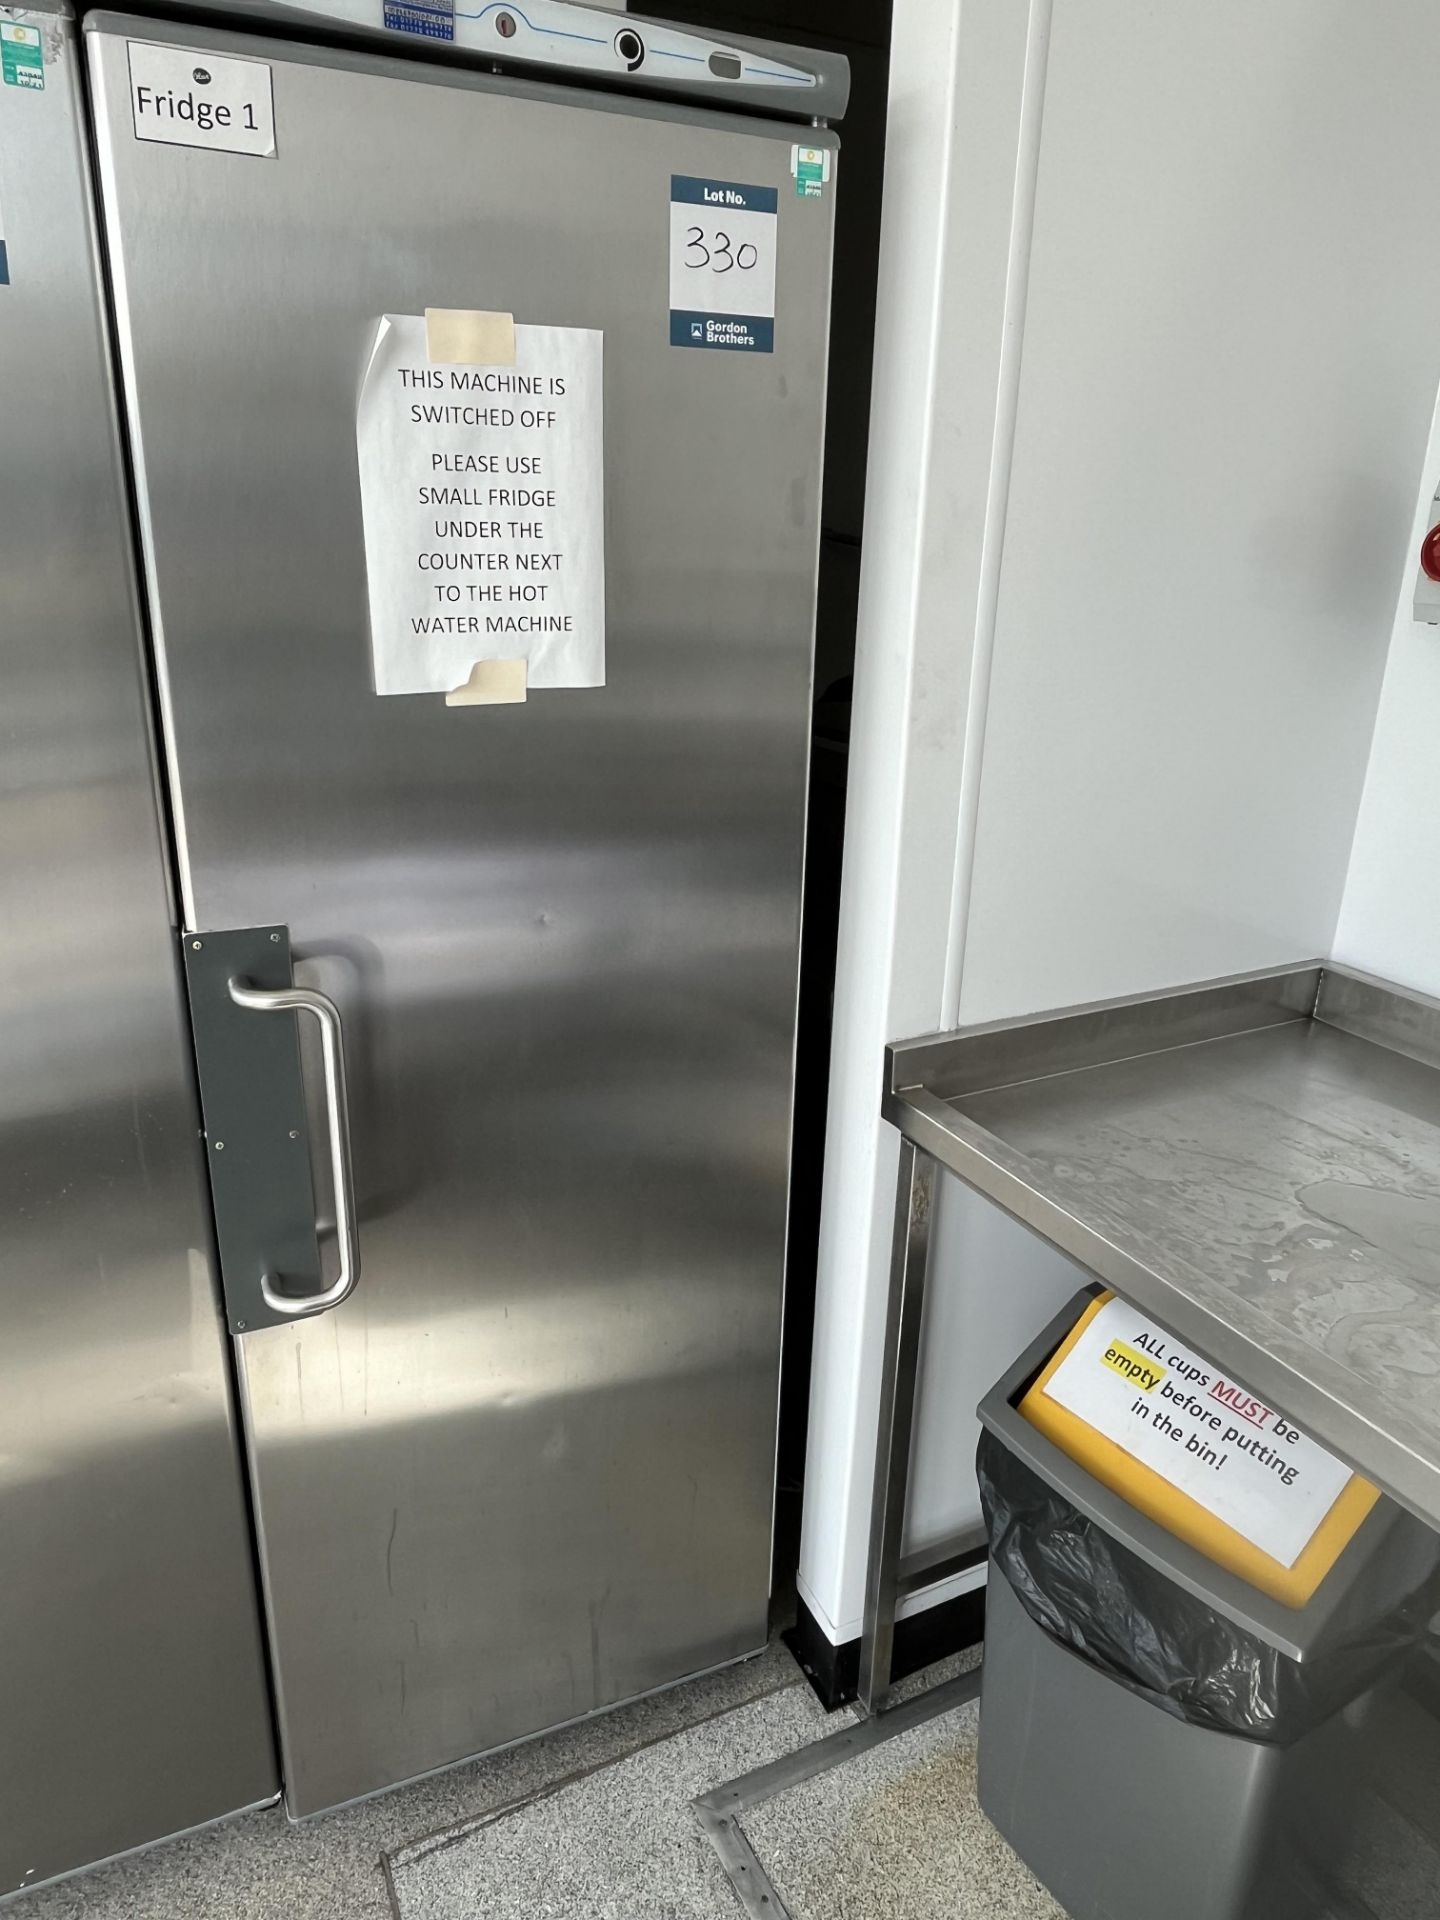 Modial Elite, upright stainless steel upright refrigerator (not in use)